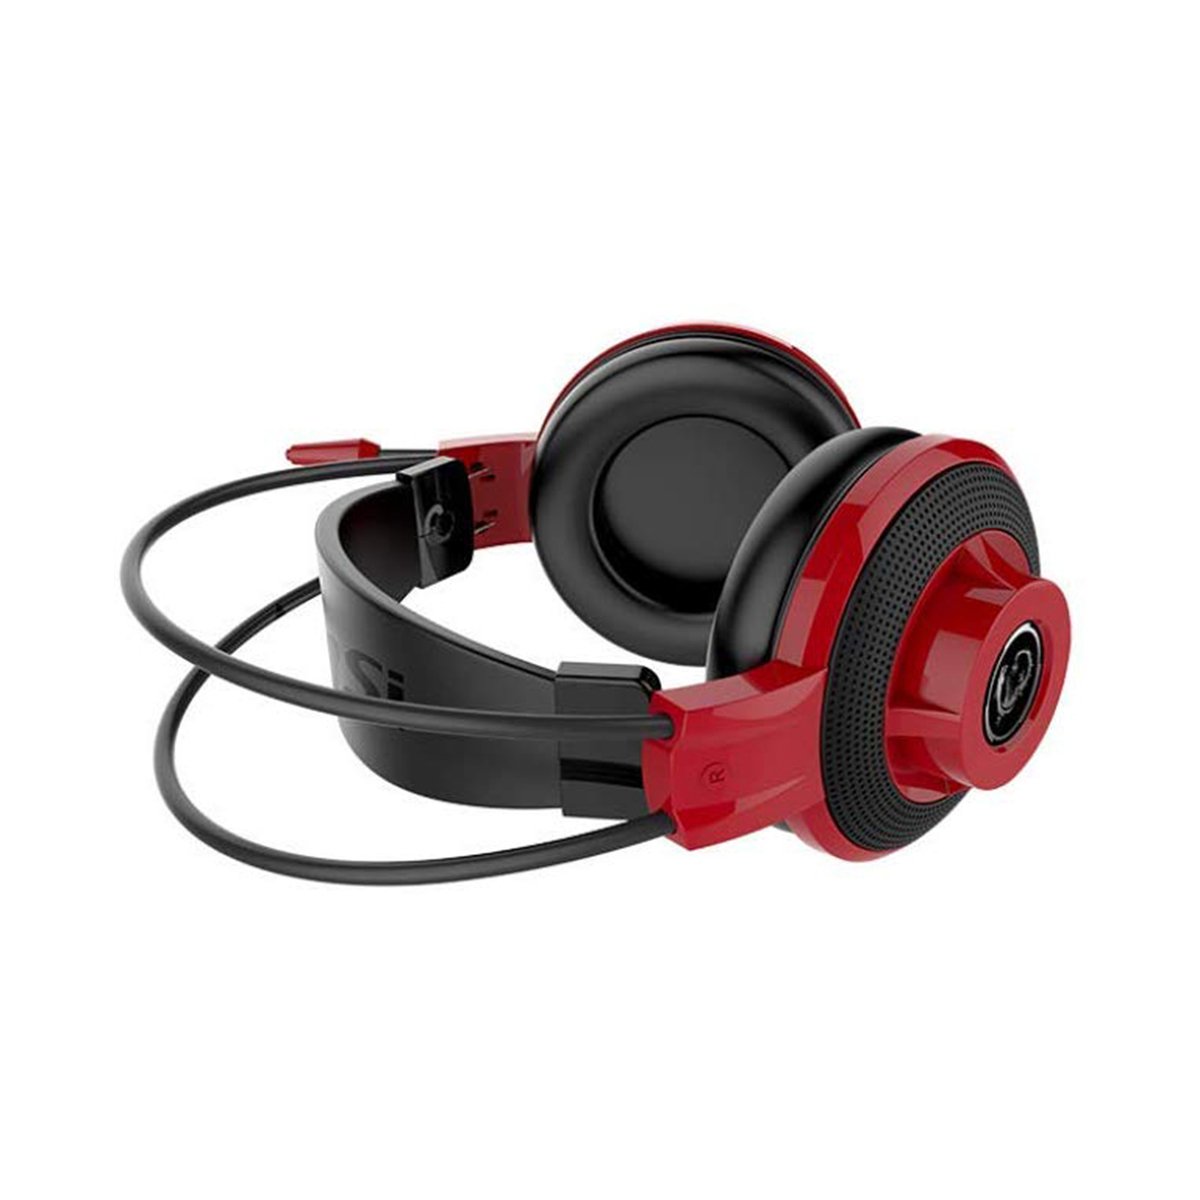 MSI Gaming Headset with Microphone HS-DS501